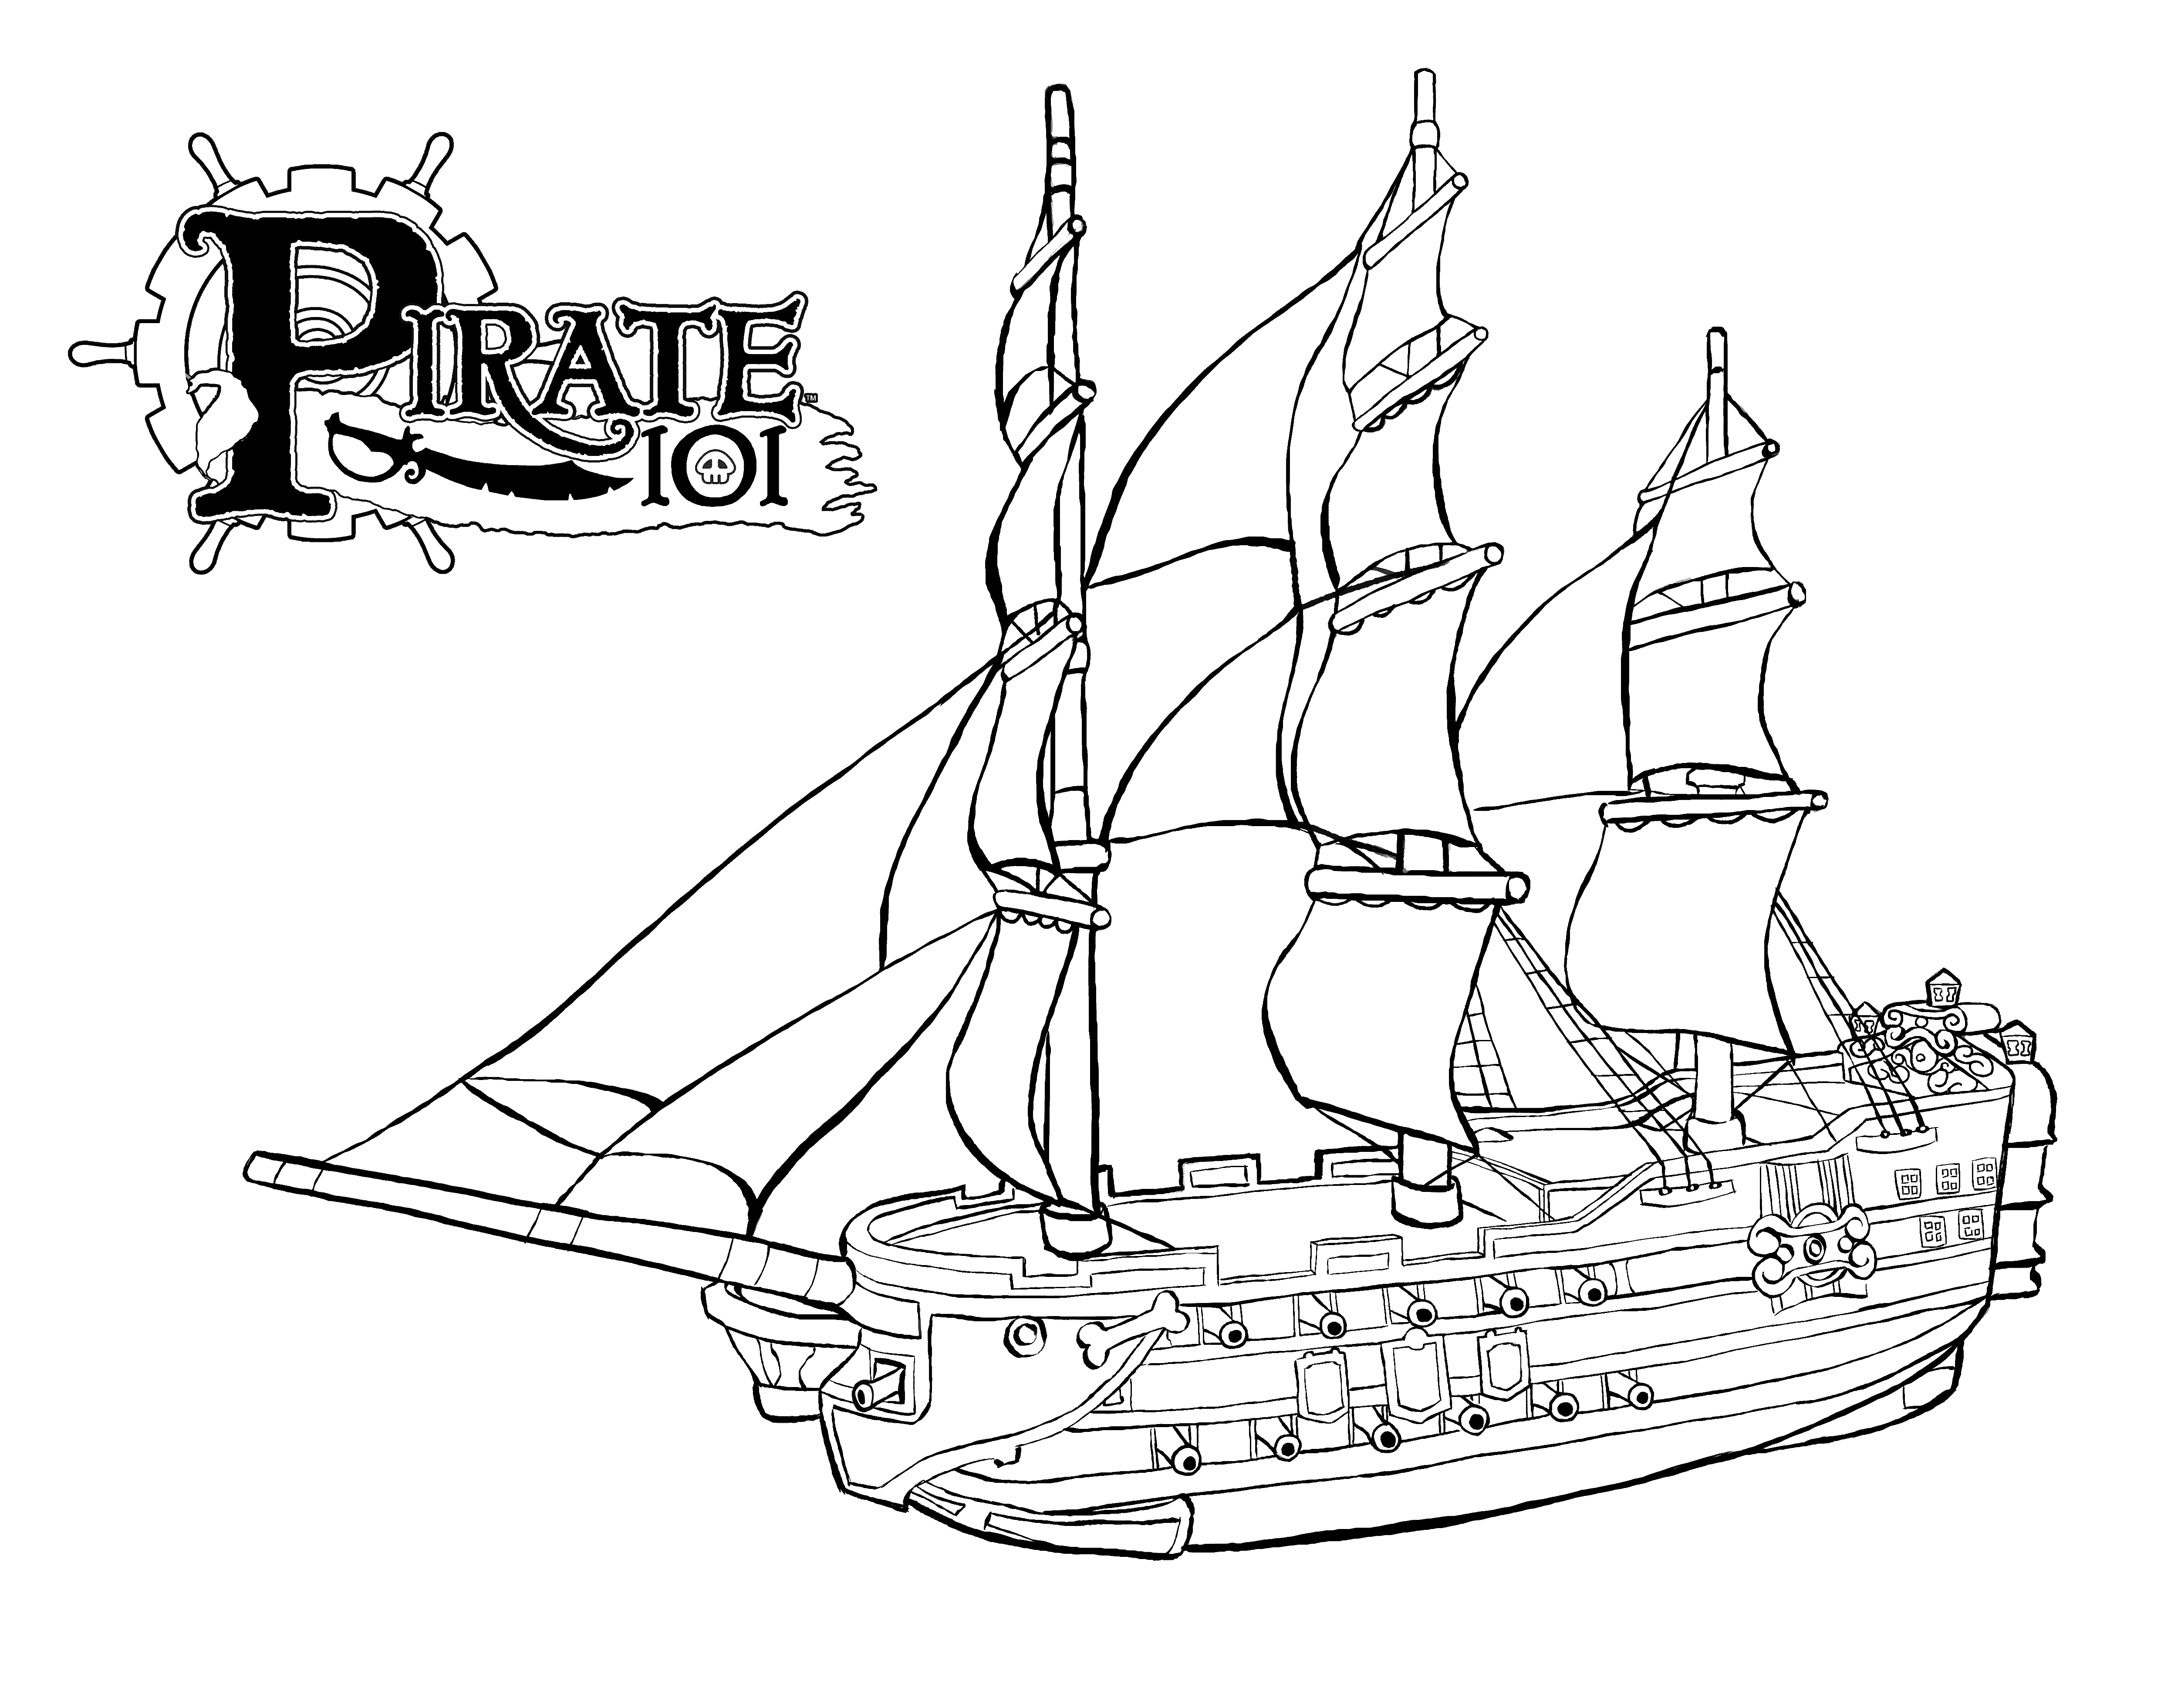 drawing-pirate-ship-138218-transportation-printable-coloring-pages